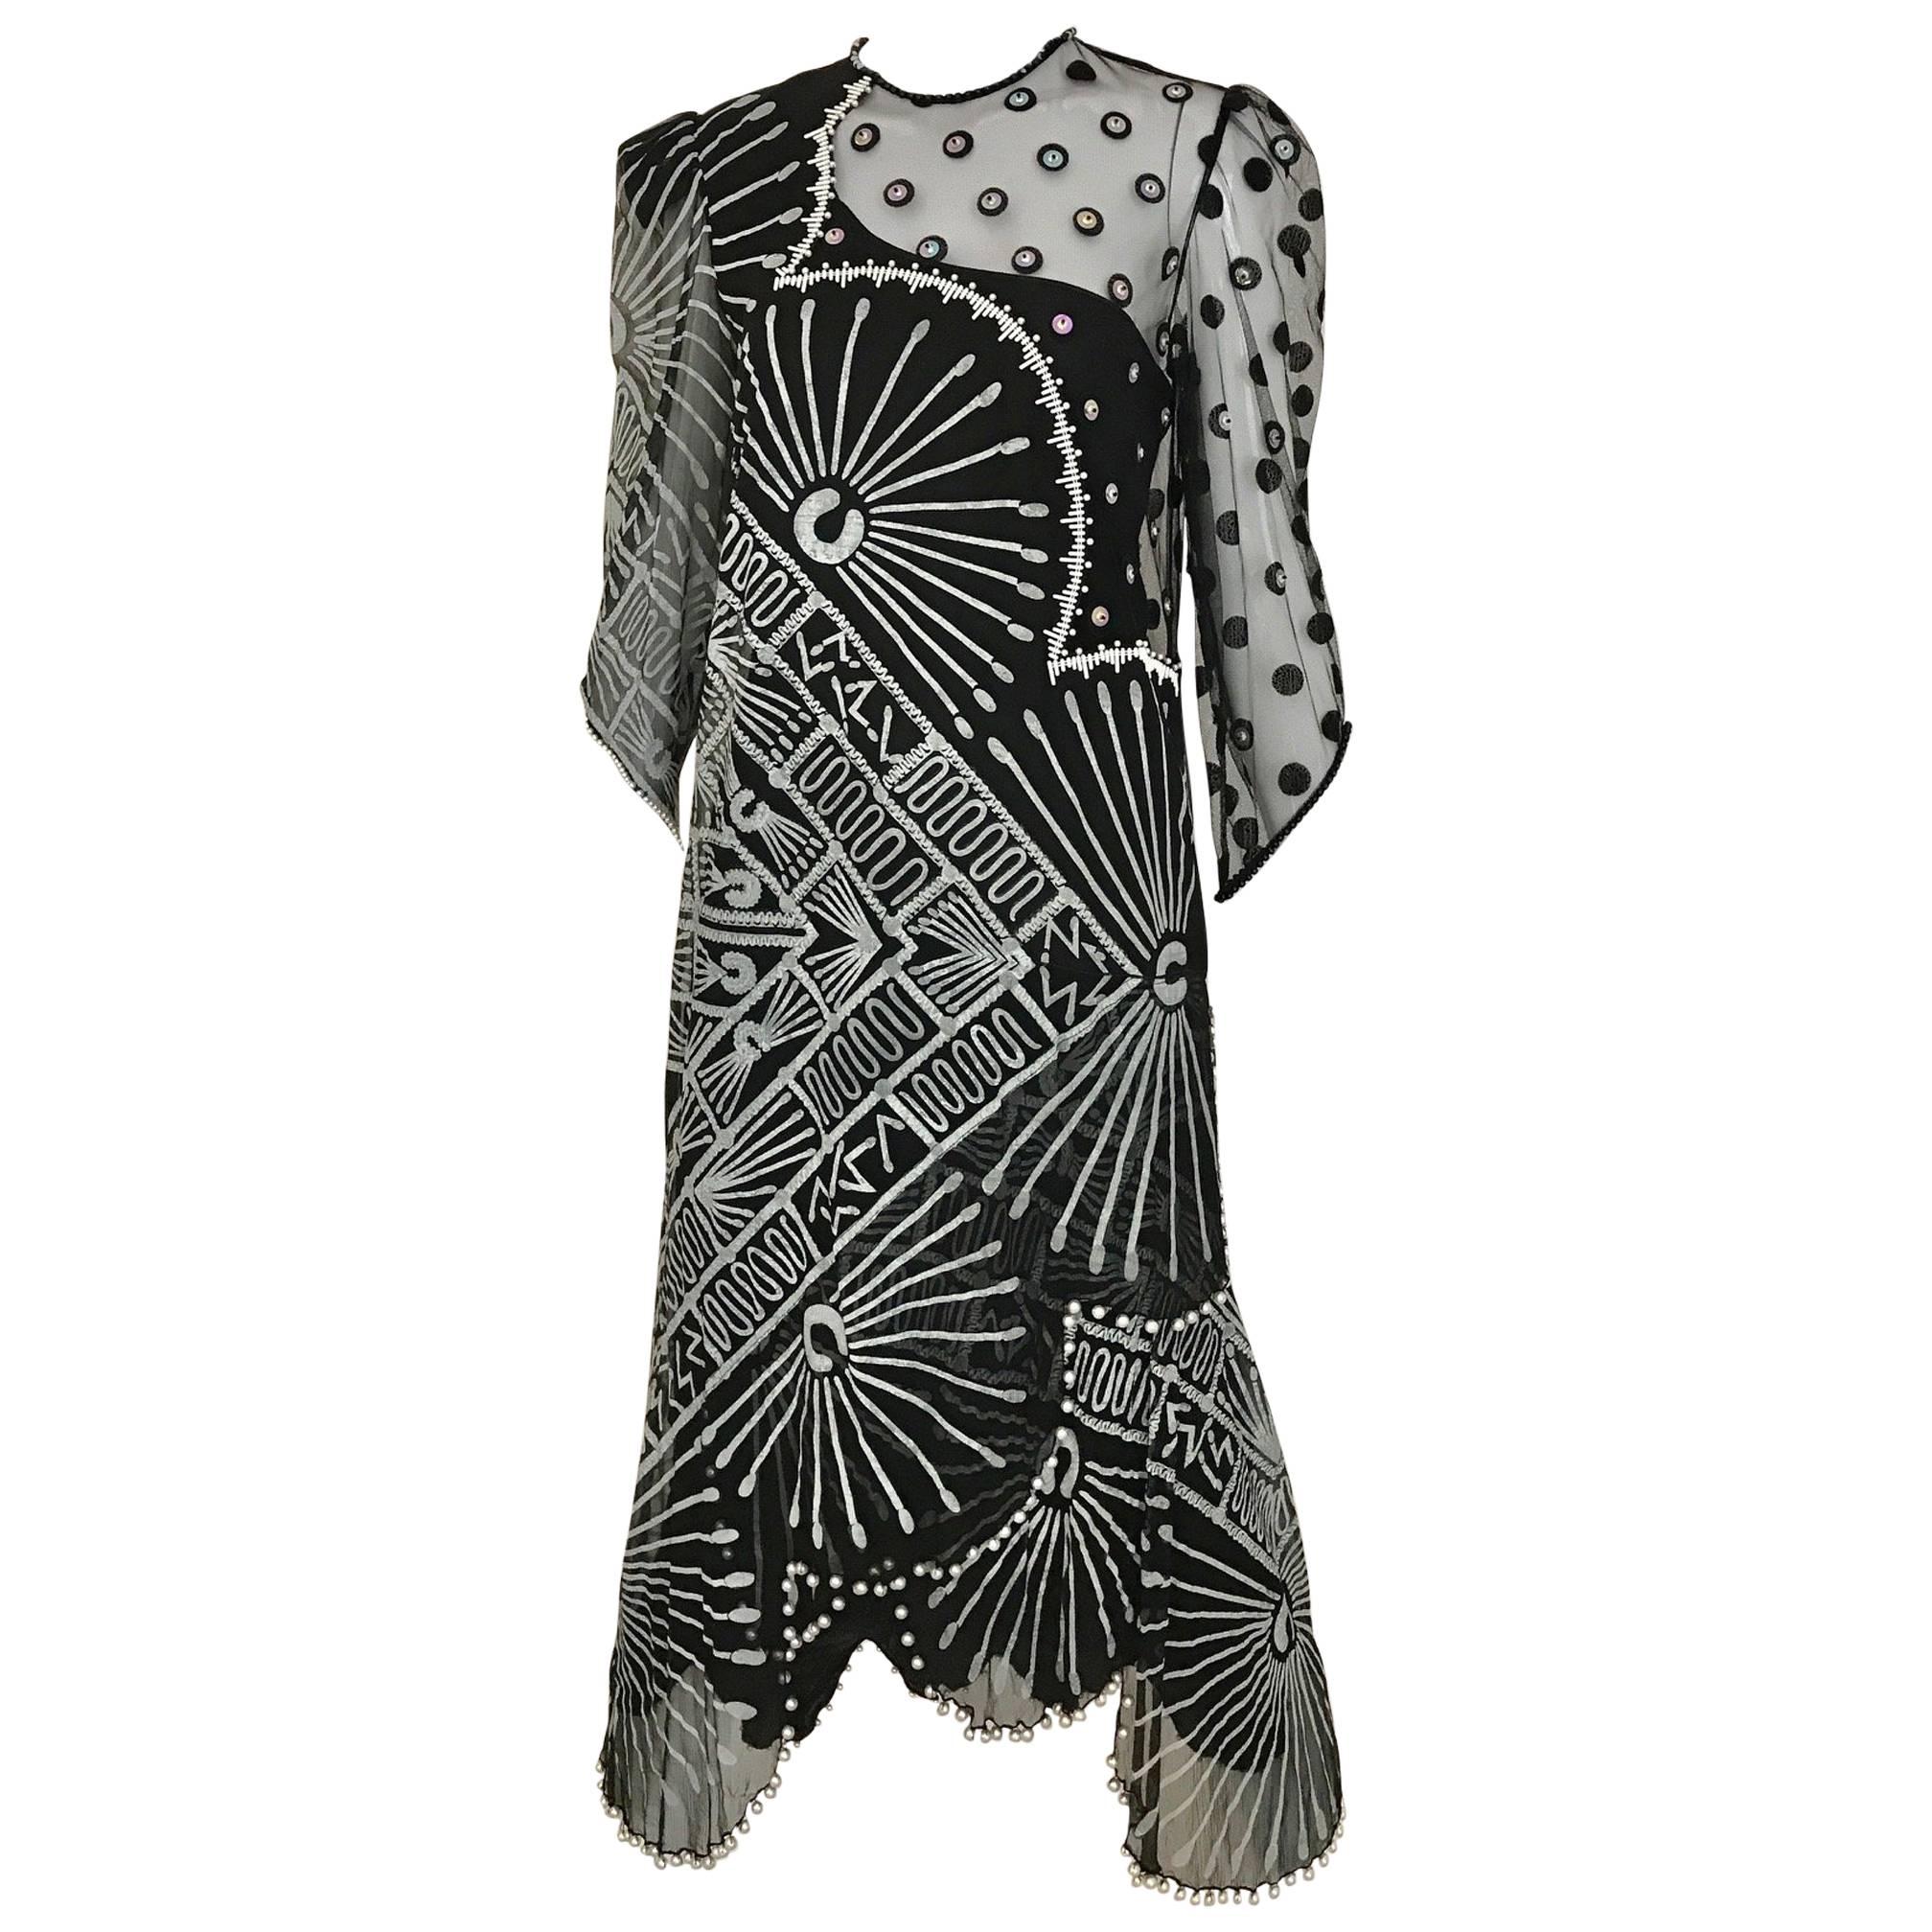 Vintage 1980s Zandra Rhodes black and gray print dress with with pearls